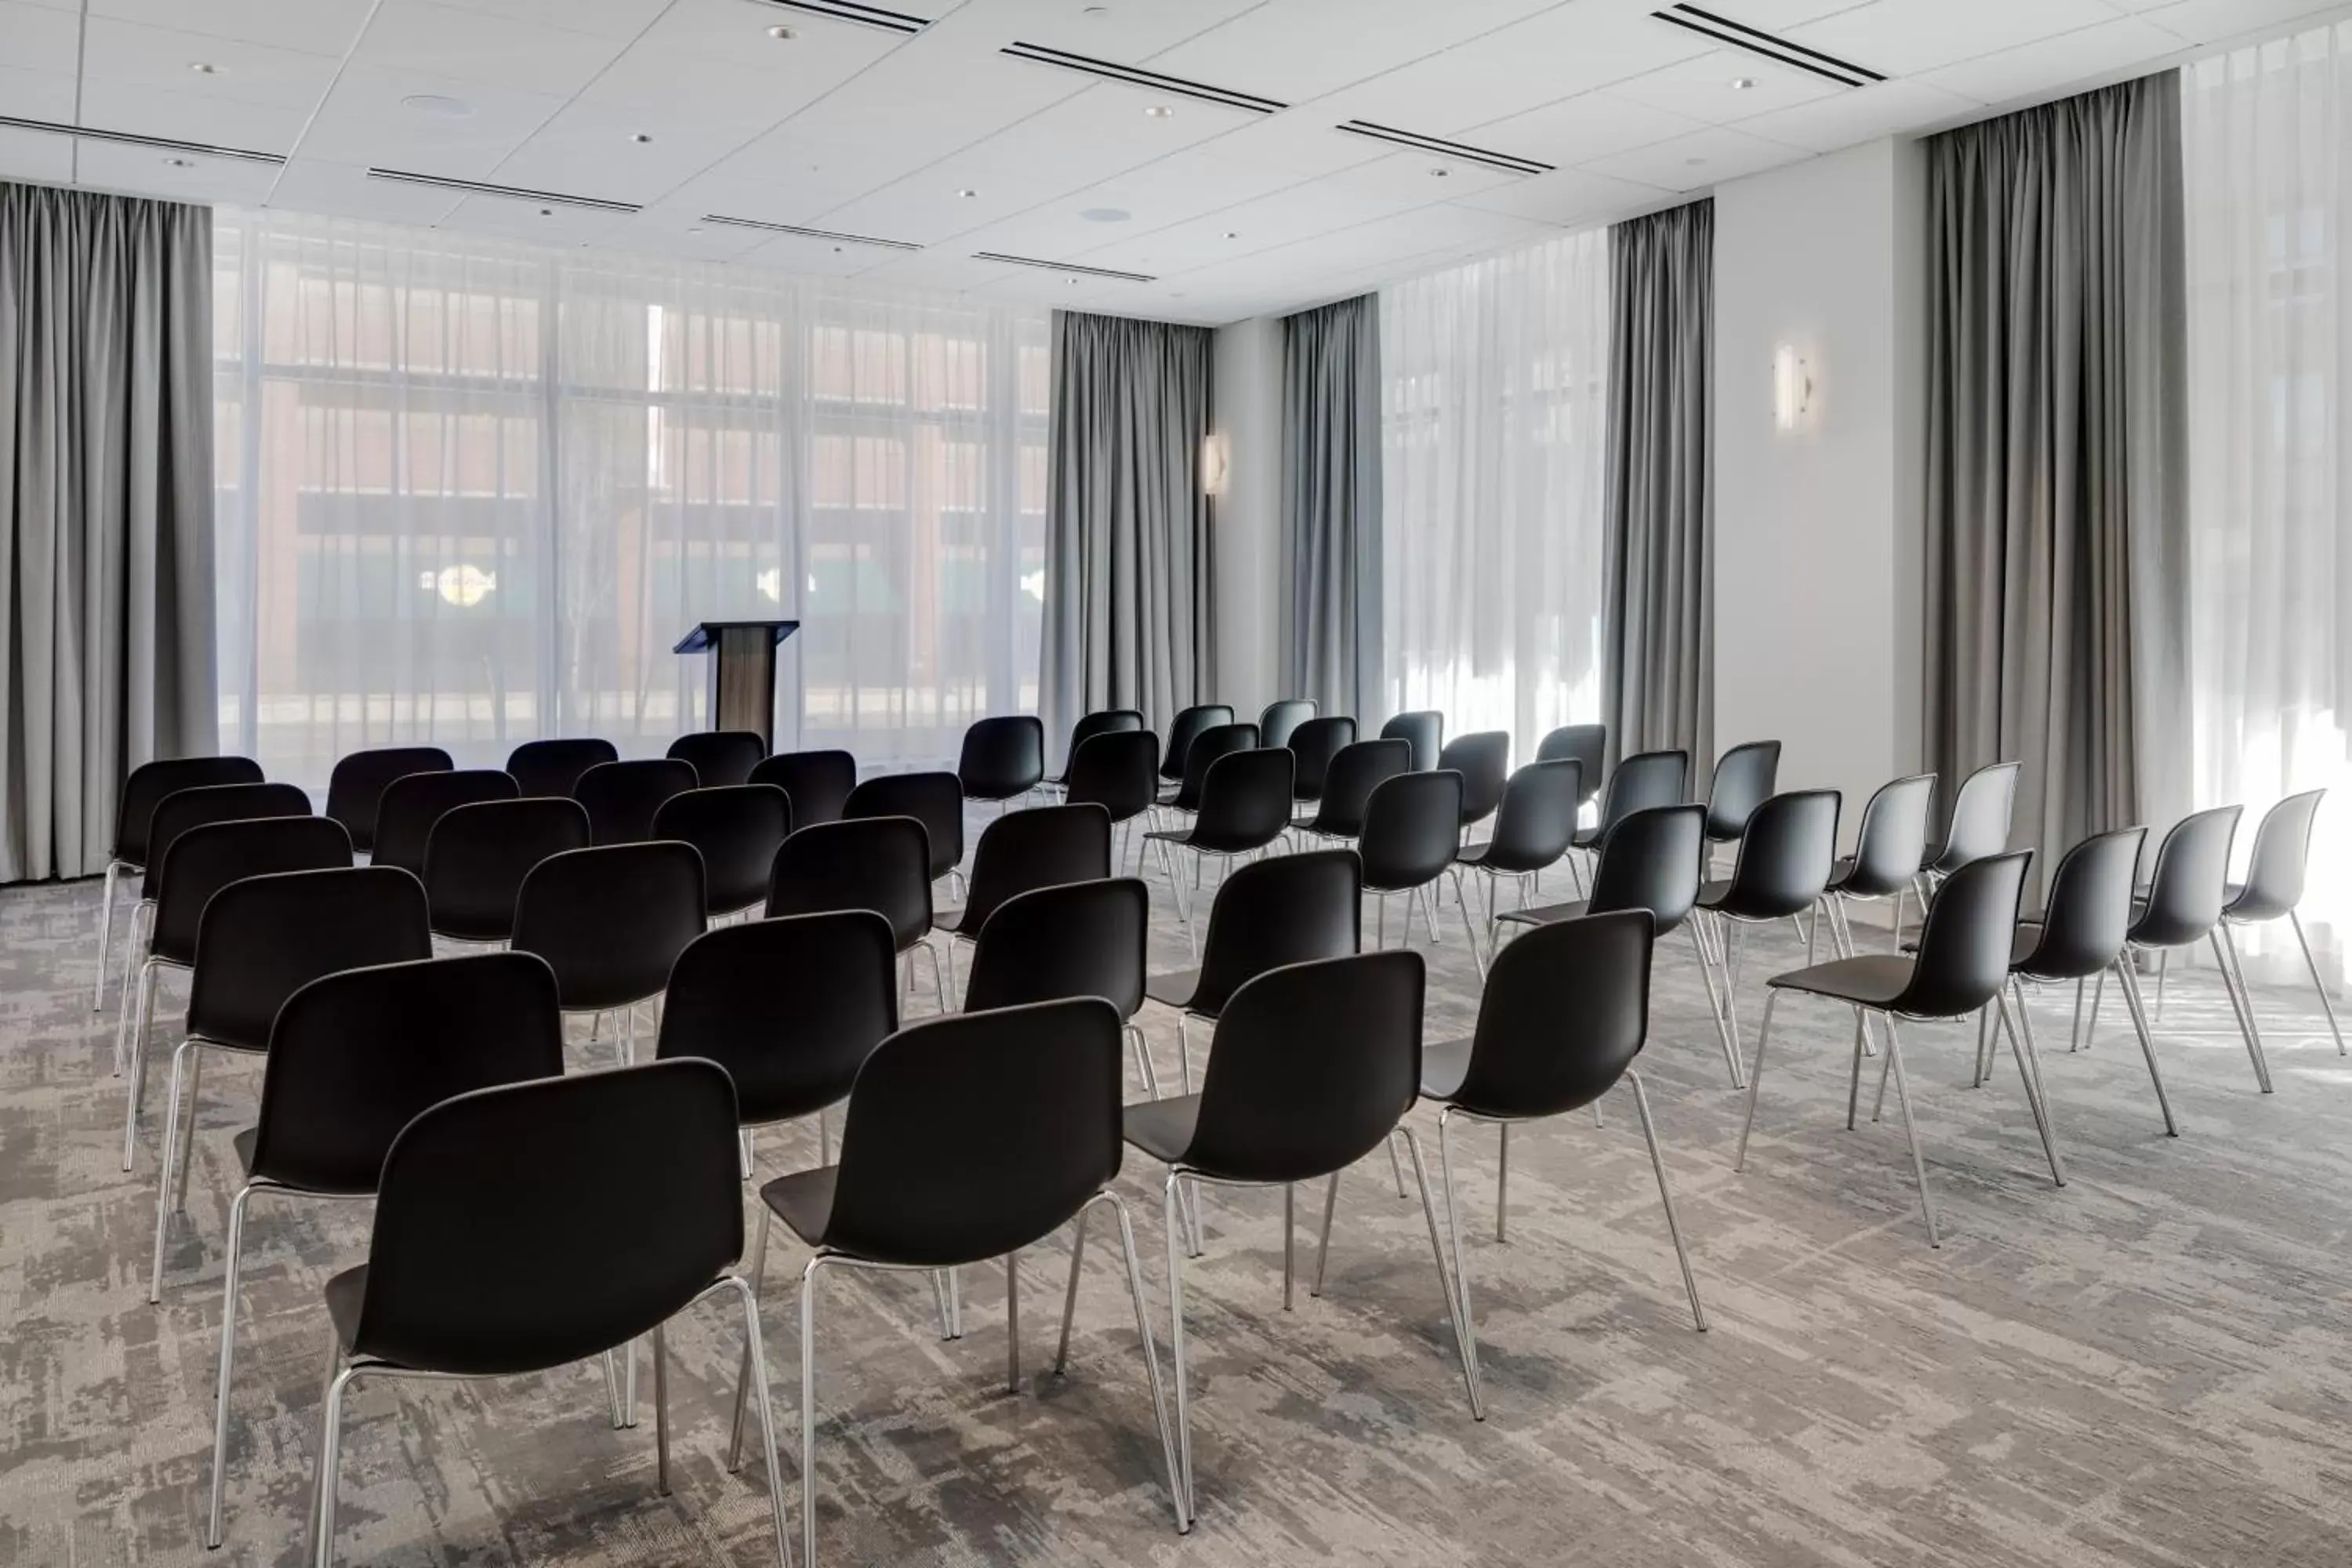 Meeting/conference room in Canopy By Hilton Boston Downtown